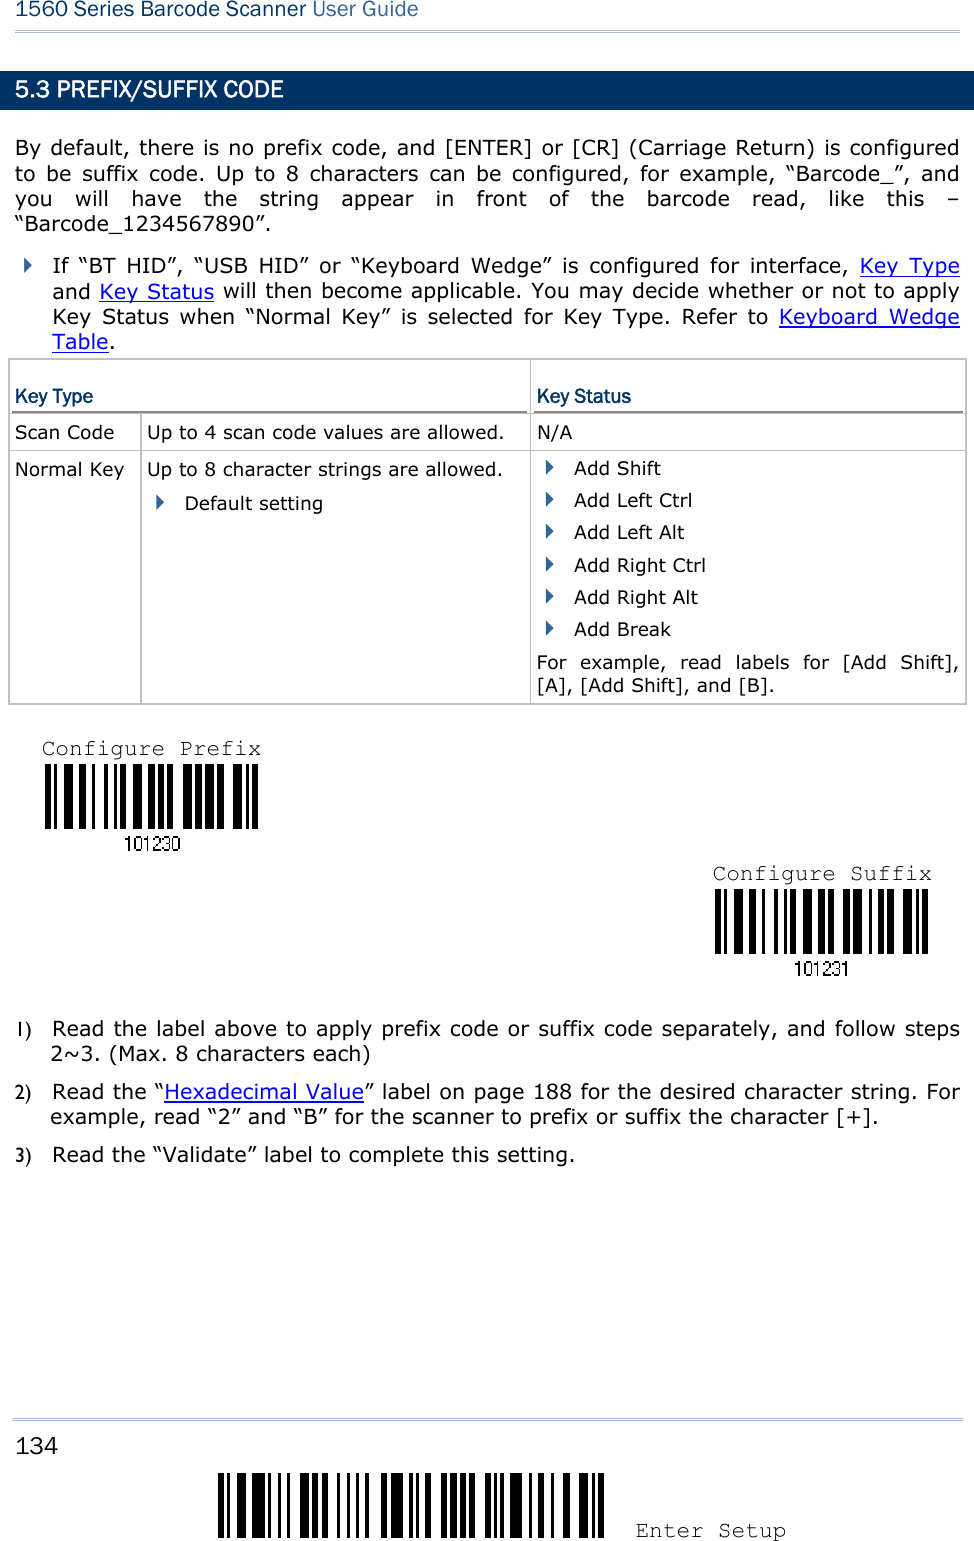 134 Enter Setup 1560 Series Barcode Scanner User Guide  5.3 PREFIX/SUFFIX CODE By default, there is no prefix code, and [ENTER] or [CR] (Carriage Return) is configured to be suffix code. Up to 8 characters can be configured, for example, “Barcode_”, and you will have the string appear in front of the barcode read, like this – “Barcode_1234567890”.  If “BT HID”, “USB HID” or “Keyboard Wedge” is configured for interface, Key Type and Key Status will then become applicable. You may decide whether or not to apply Key Status when “Normal Key” is selected for Key Type. Refer to Keyboard Wedge Table. Key Type  Key Status Scan Code    Up to 4 scan code values are allowed.  N/A Normal Key    Up to 8 character strings are allowed.  Default setting  Add Shift  Add Left Ctrl  Add Left Alt  Add Right Ctrl  Add Right Alt  Add Break For example, read labels for [Add Shift], [A], [Add Shift], and [B].      1) Read the label above to apply prefix code or suffix code separately, and follow steps 2~3. (Max. 8 characters each) 2) Read the “Hexadecimal Value” label on page 188 for the desired character string. For example, read “2” and “B” for the scanner to prefix or suffix the character [+]. 3) Read the “Validate” label to complete this setting. Configure Prefix Configure Suffix